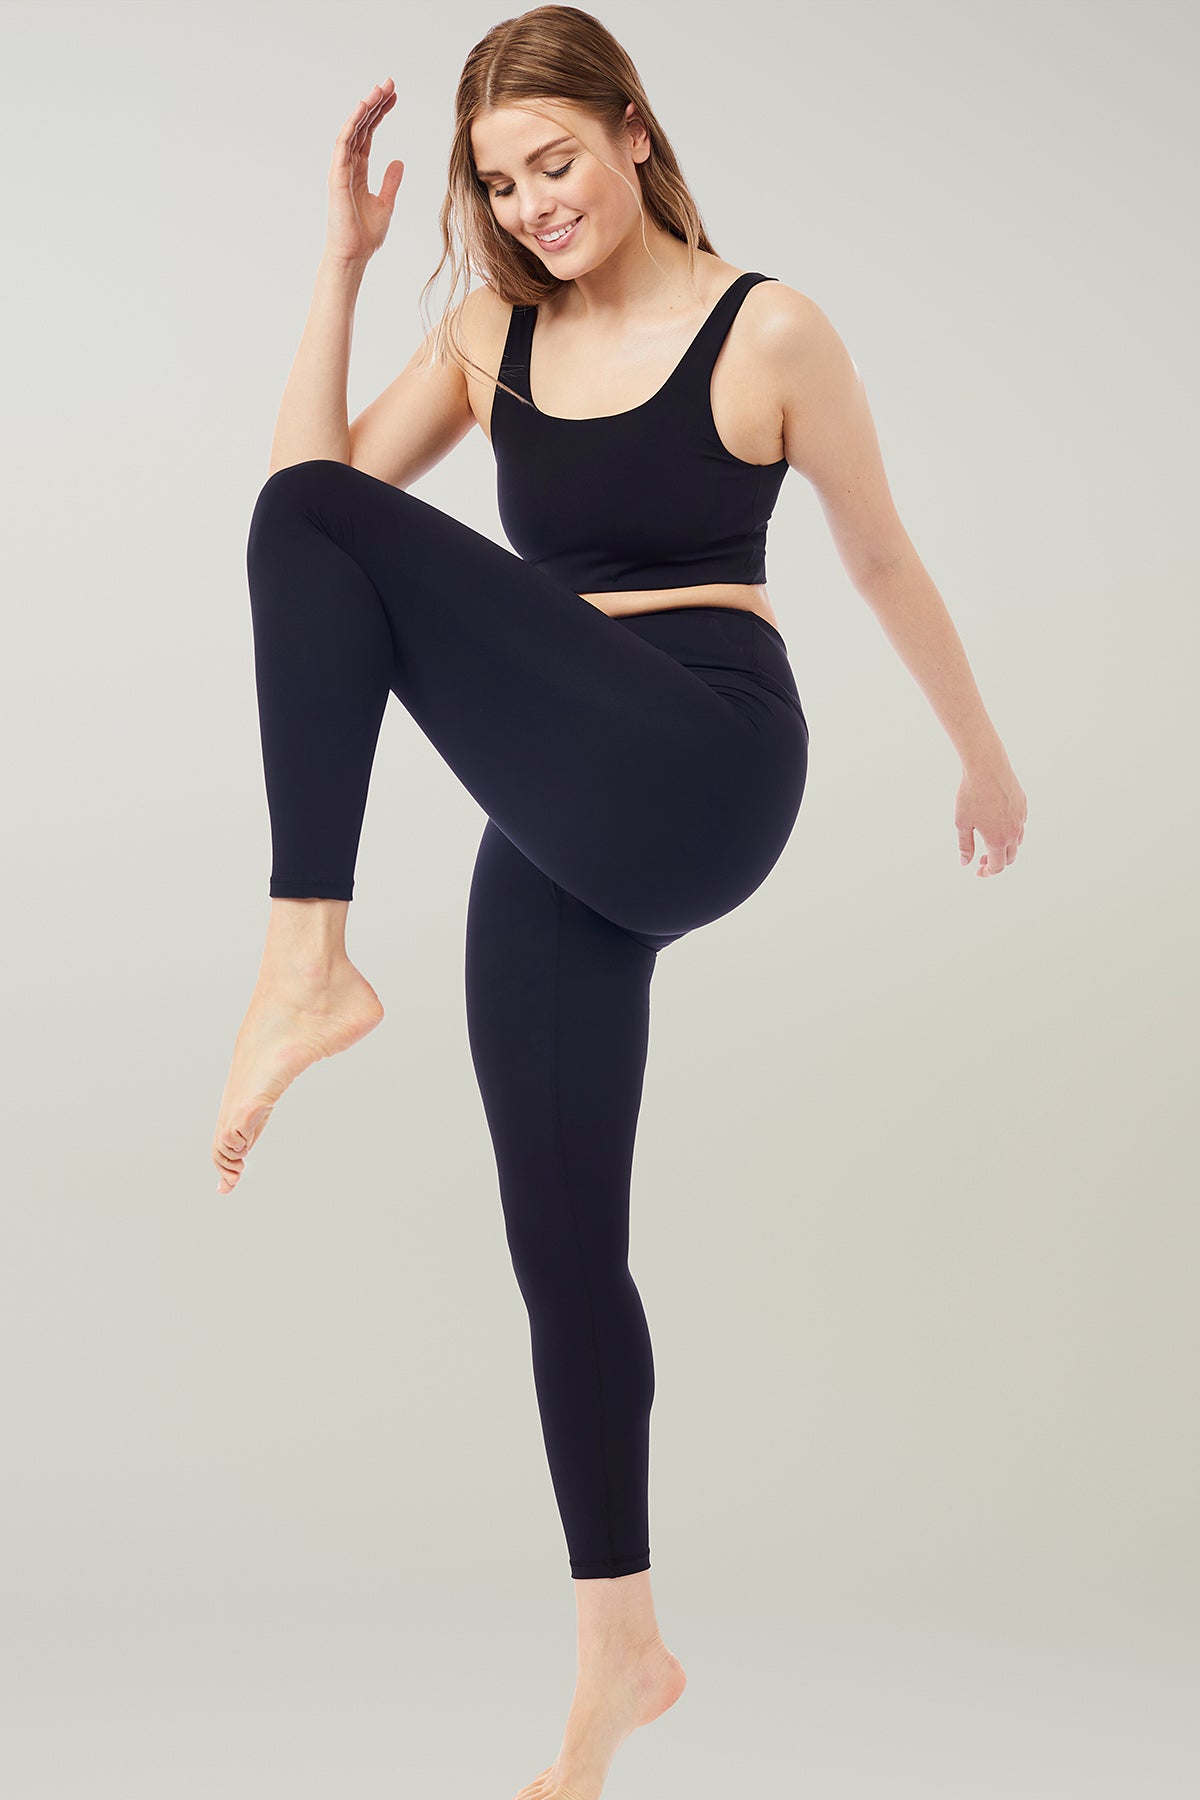 The Best Organic Cotton Leggings in 2022 - beeco